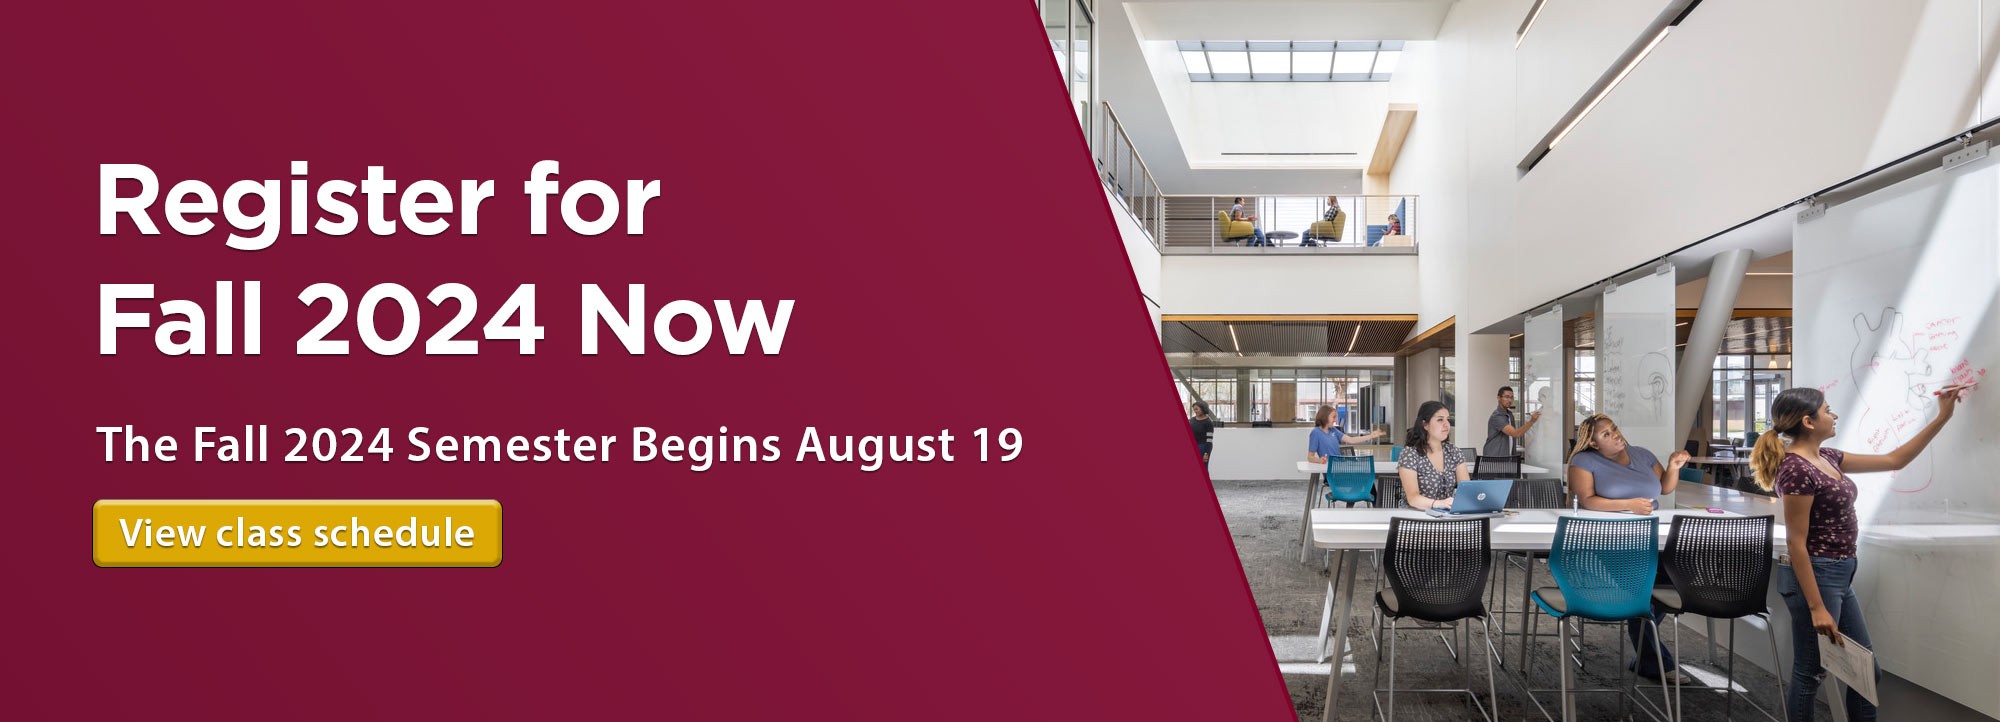 Register for Fall 2024 Now. The Fall Semester Begins August 19